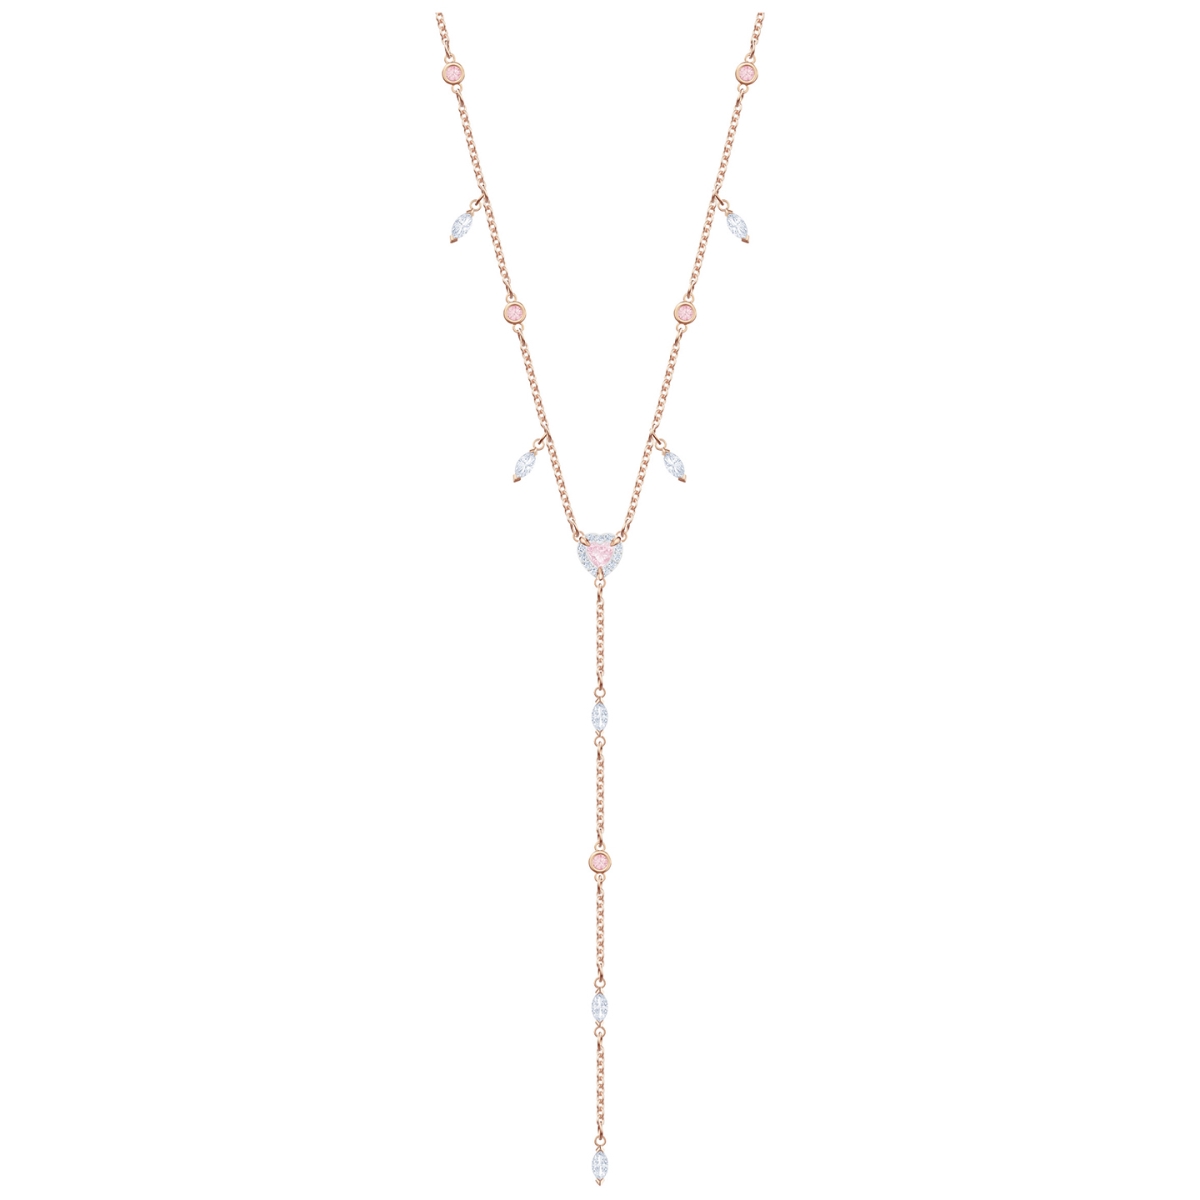 5439313 One Y Necklace, Multi Color - Rose Gold Plated